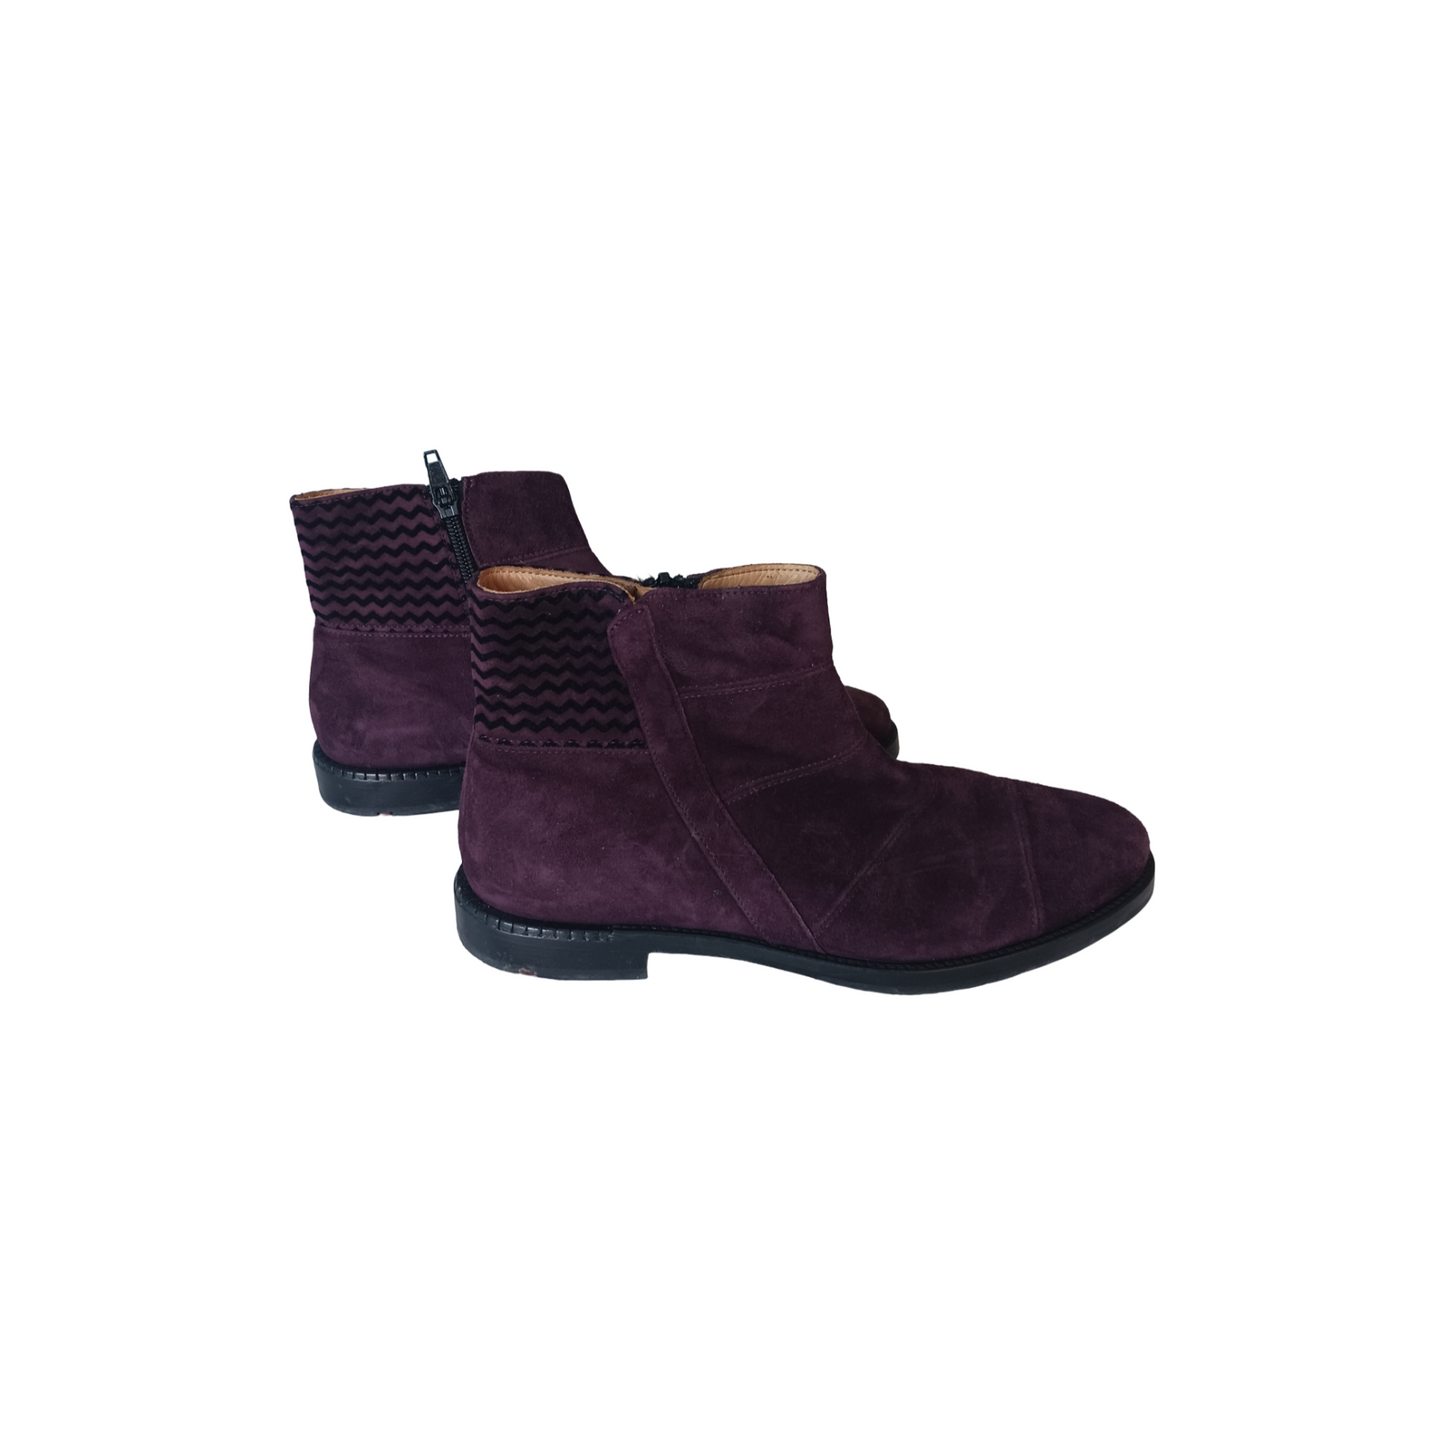 Lloyd Purple Suede Ankle Boots, Size 9